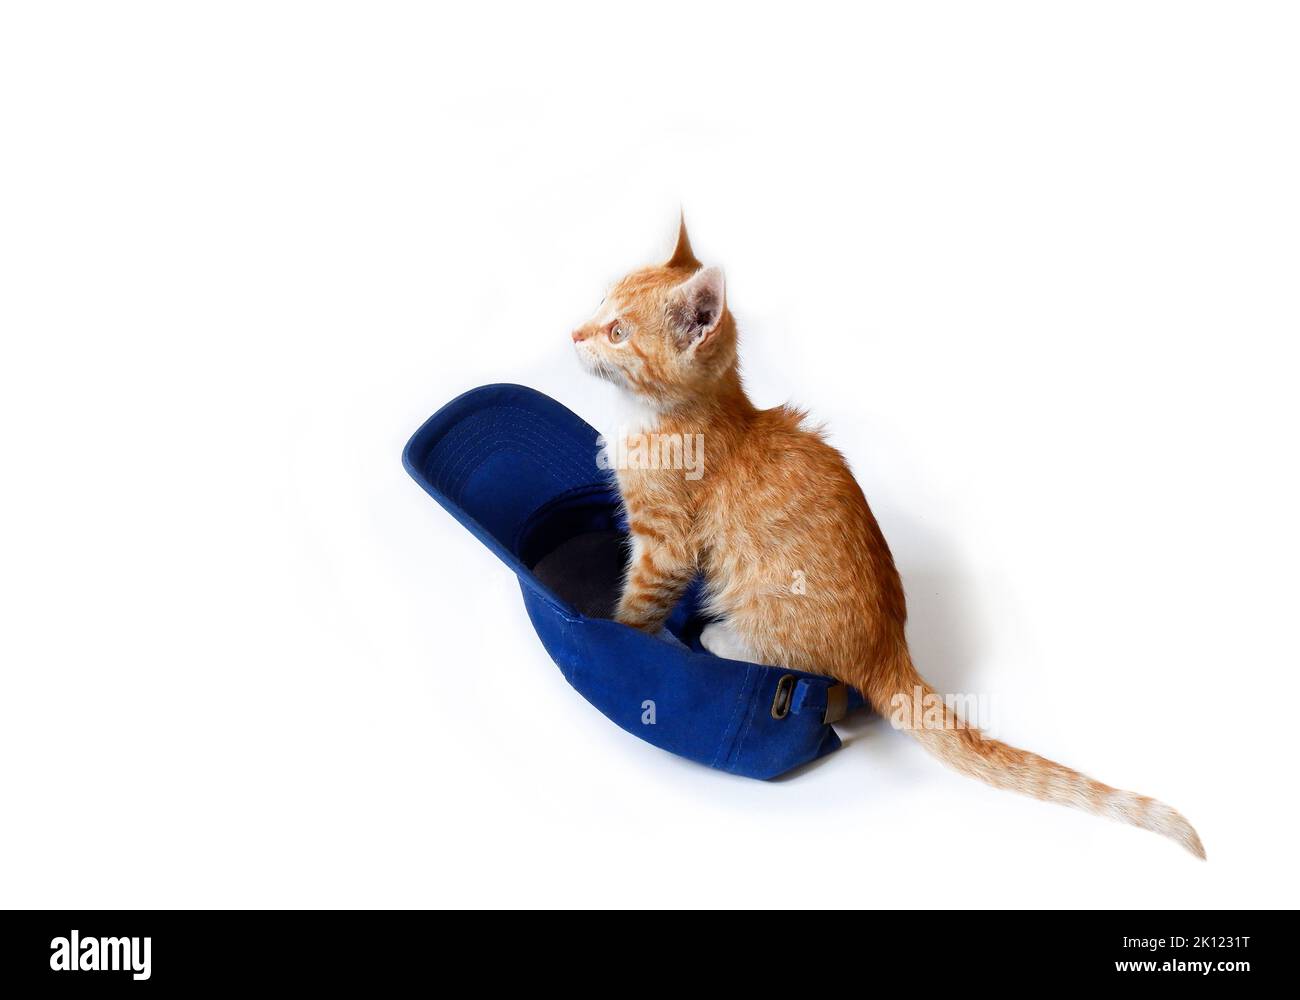 Red kitten sits in a blue baseball cap on a white background.  Stock Photo